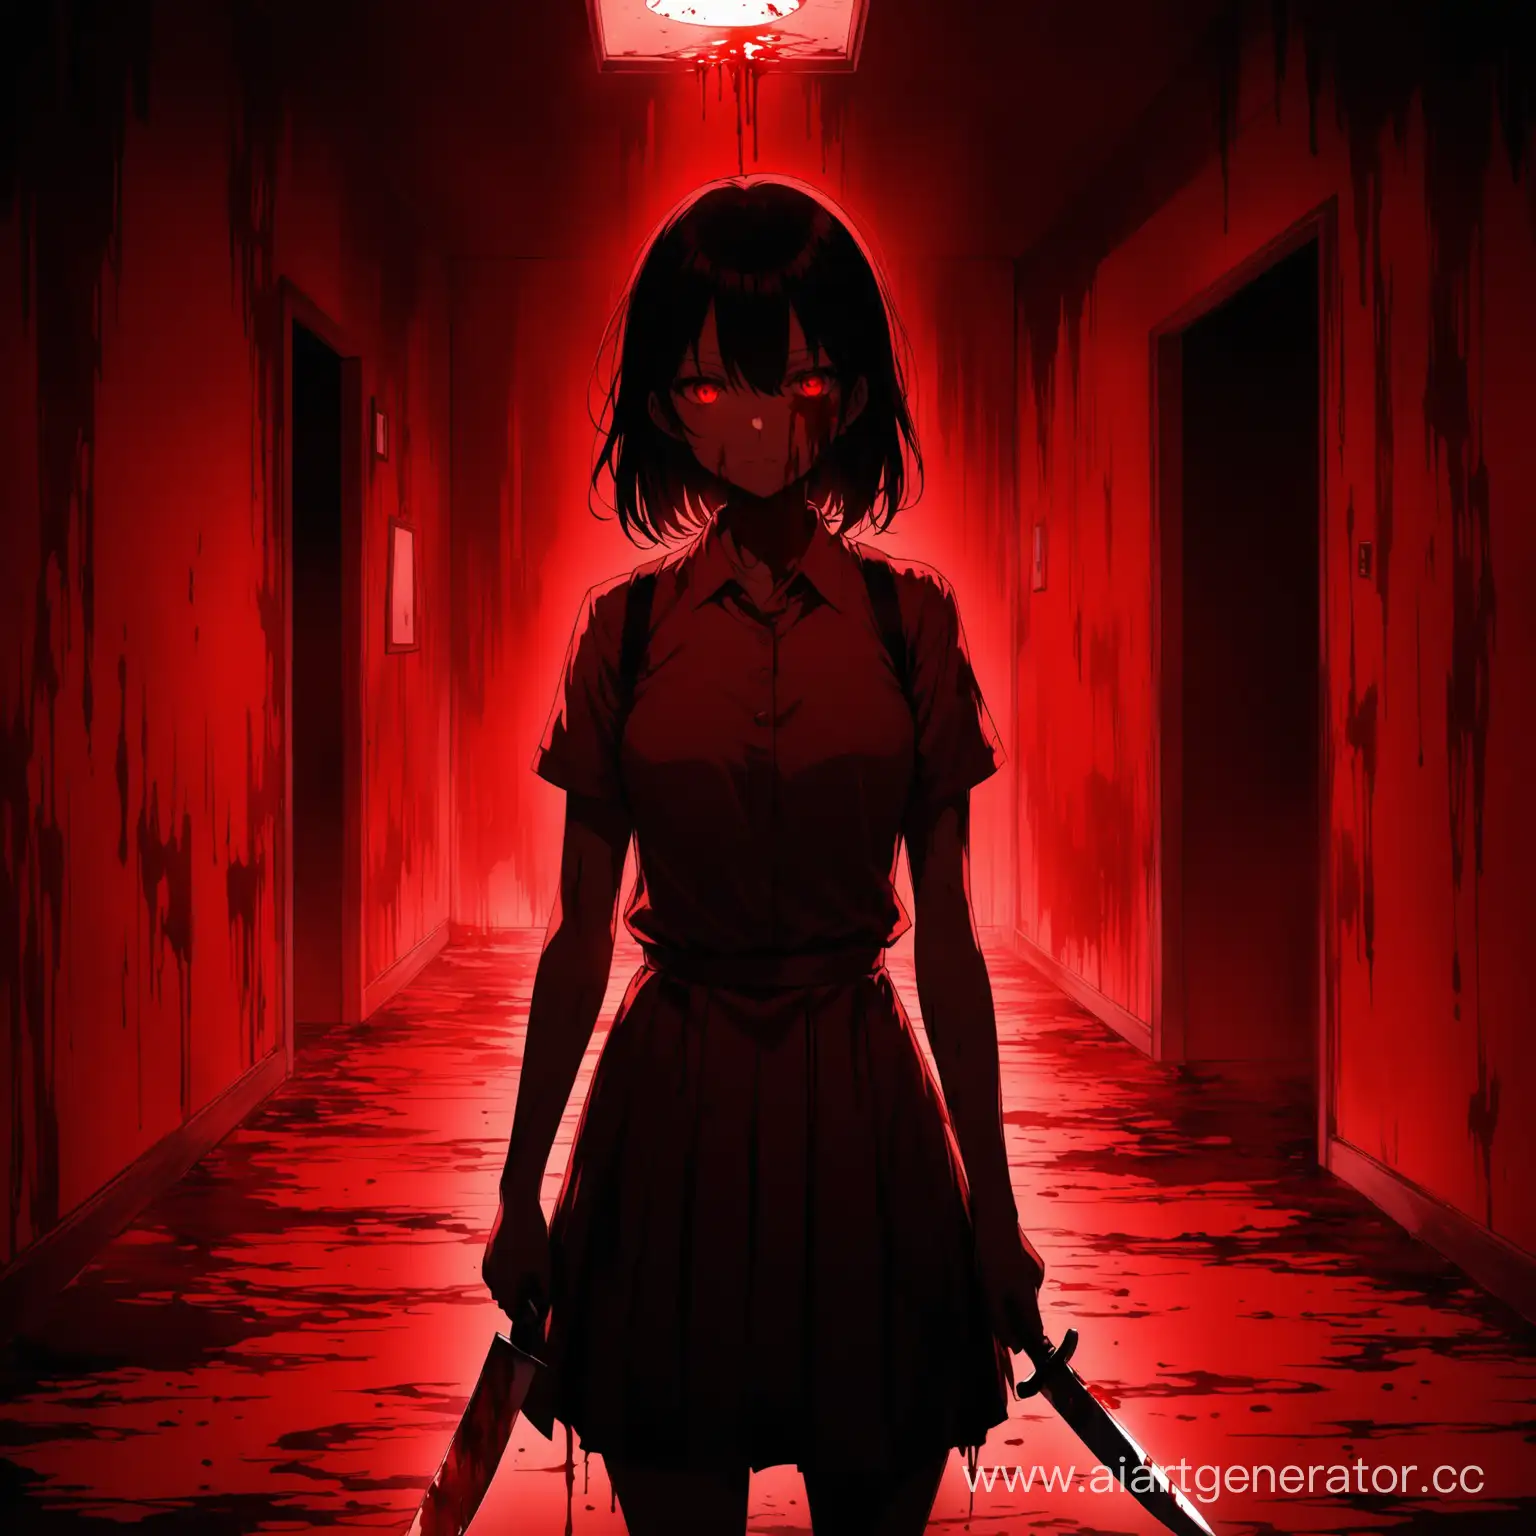 anime girl with blood knife, blood, blood is everywhere in the room, a red filter and red rays of light make their way into the darkness